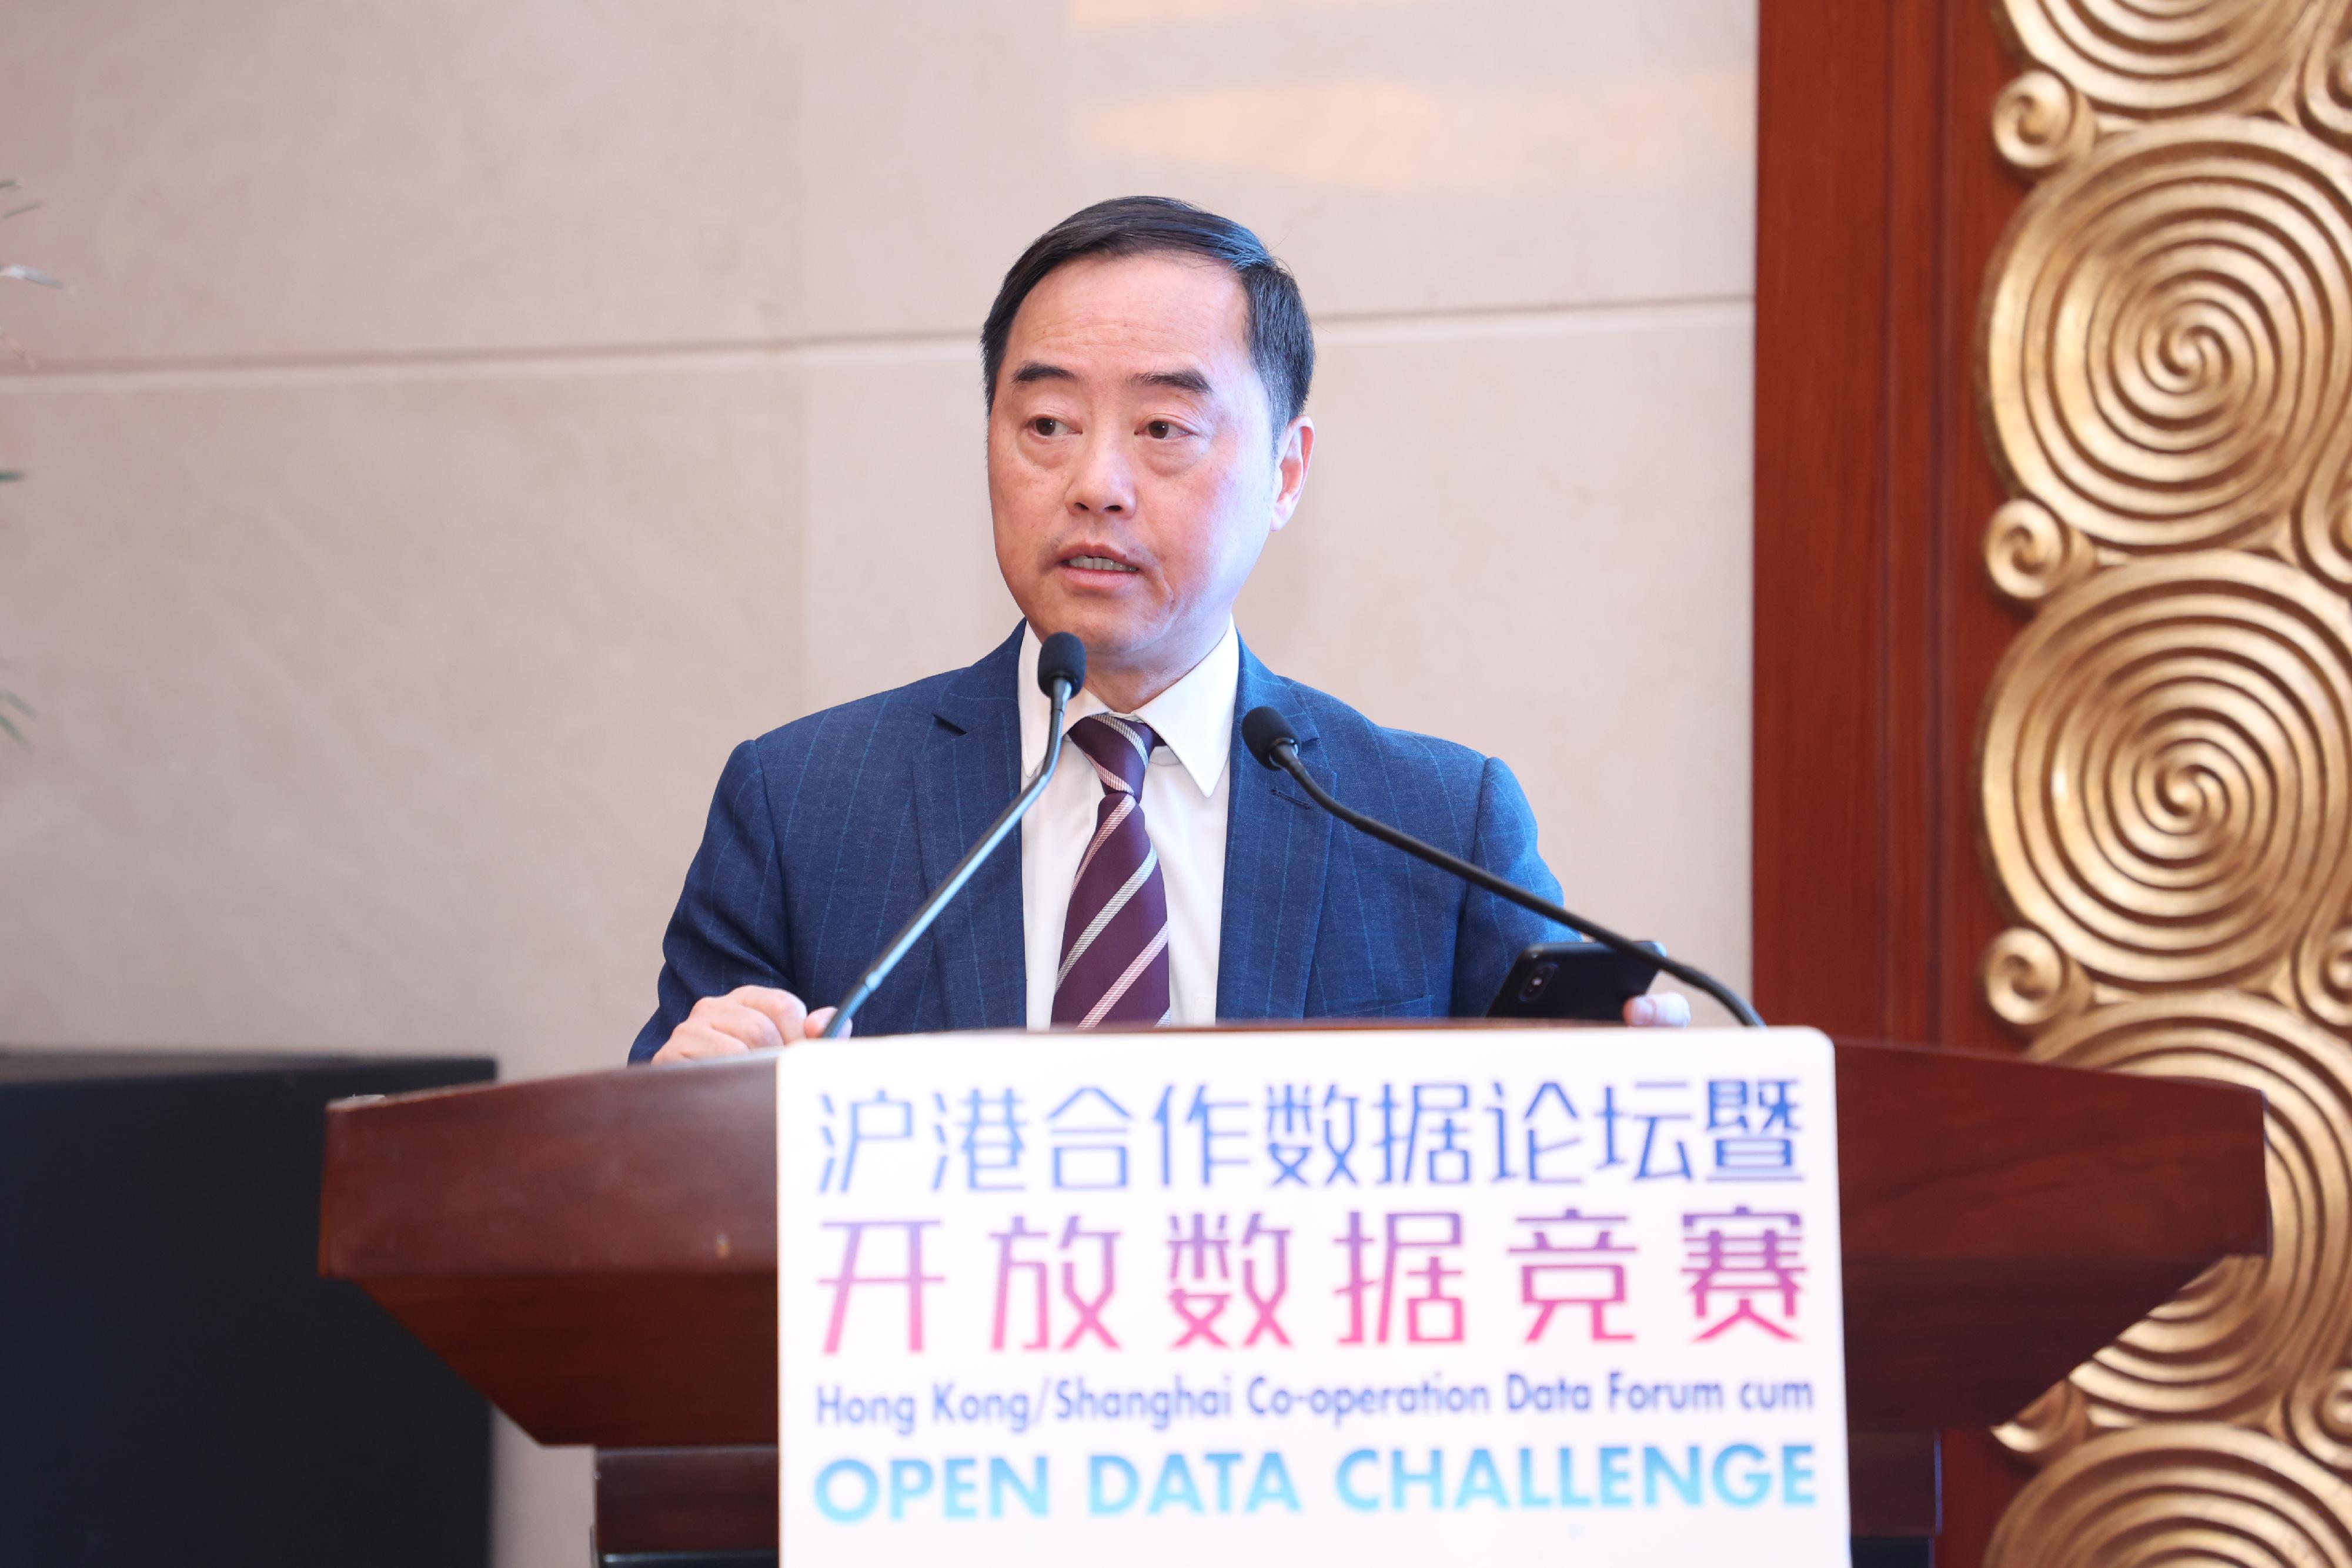 The Government Chief Information Officer, Mr Tony Wong, speaks at the Awards Presentation Ceremony of the first Hong Kong/Shanghai Co-operation Open Data Challenge in Shanghai today (August 14) and expresses his hope that the participants can make greater contributions to promoting the co-operation between Hong Kong and Shanghai in the development of digital economy.